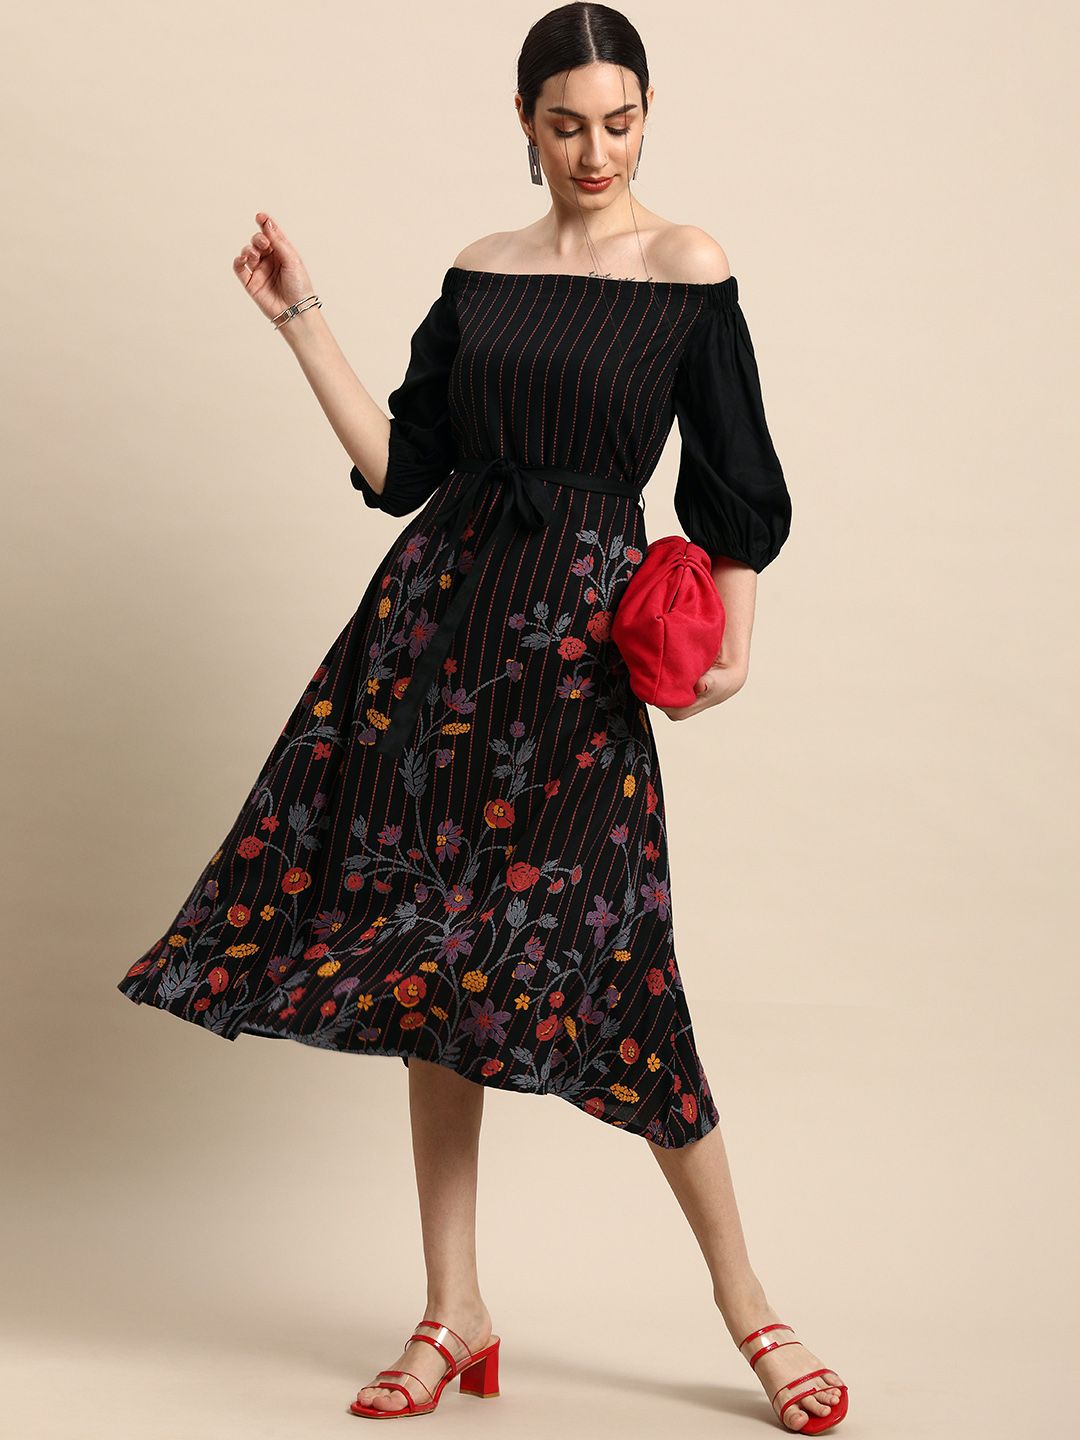 Anouk Black & Red Floral Off-Shoulder A-Line Midi Dress Price in India